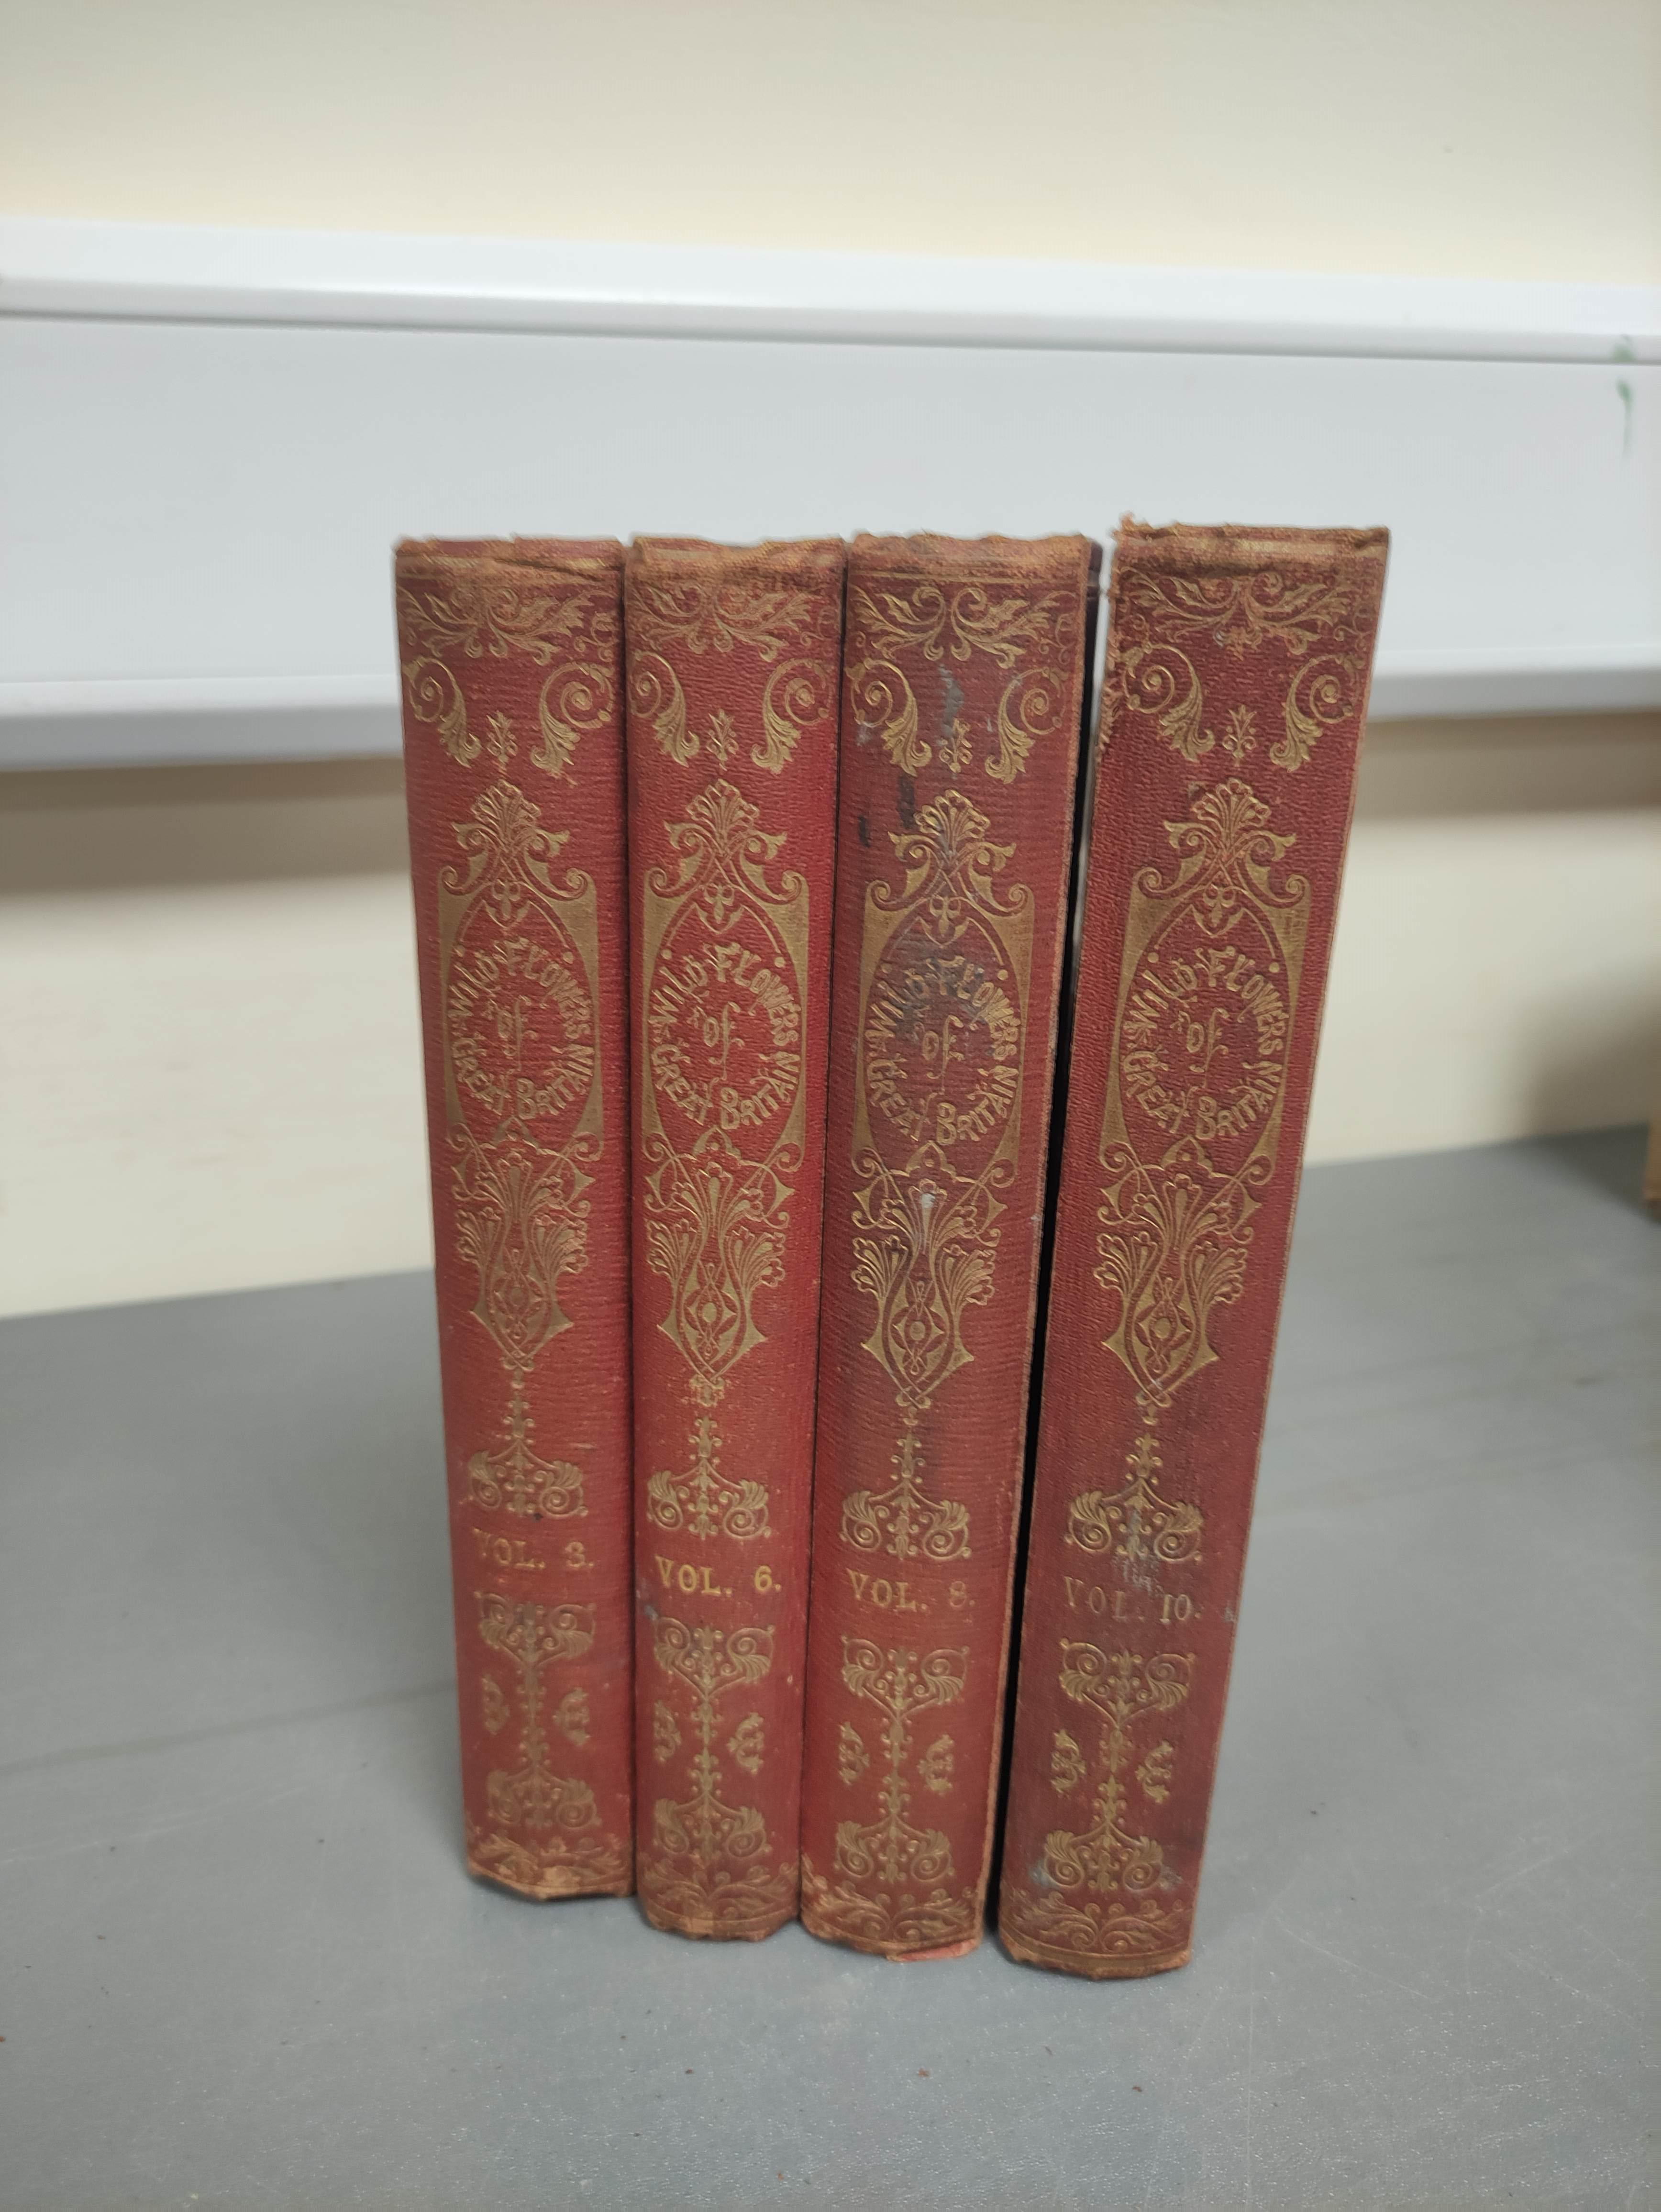 HOGG R. & JOHNSON G. W.  The Wild Flowers of Great Britain. Vols. 3, 6, 8 & 10. Many col. plates. - Image 2 of 8